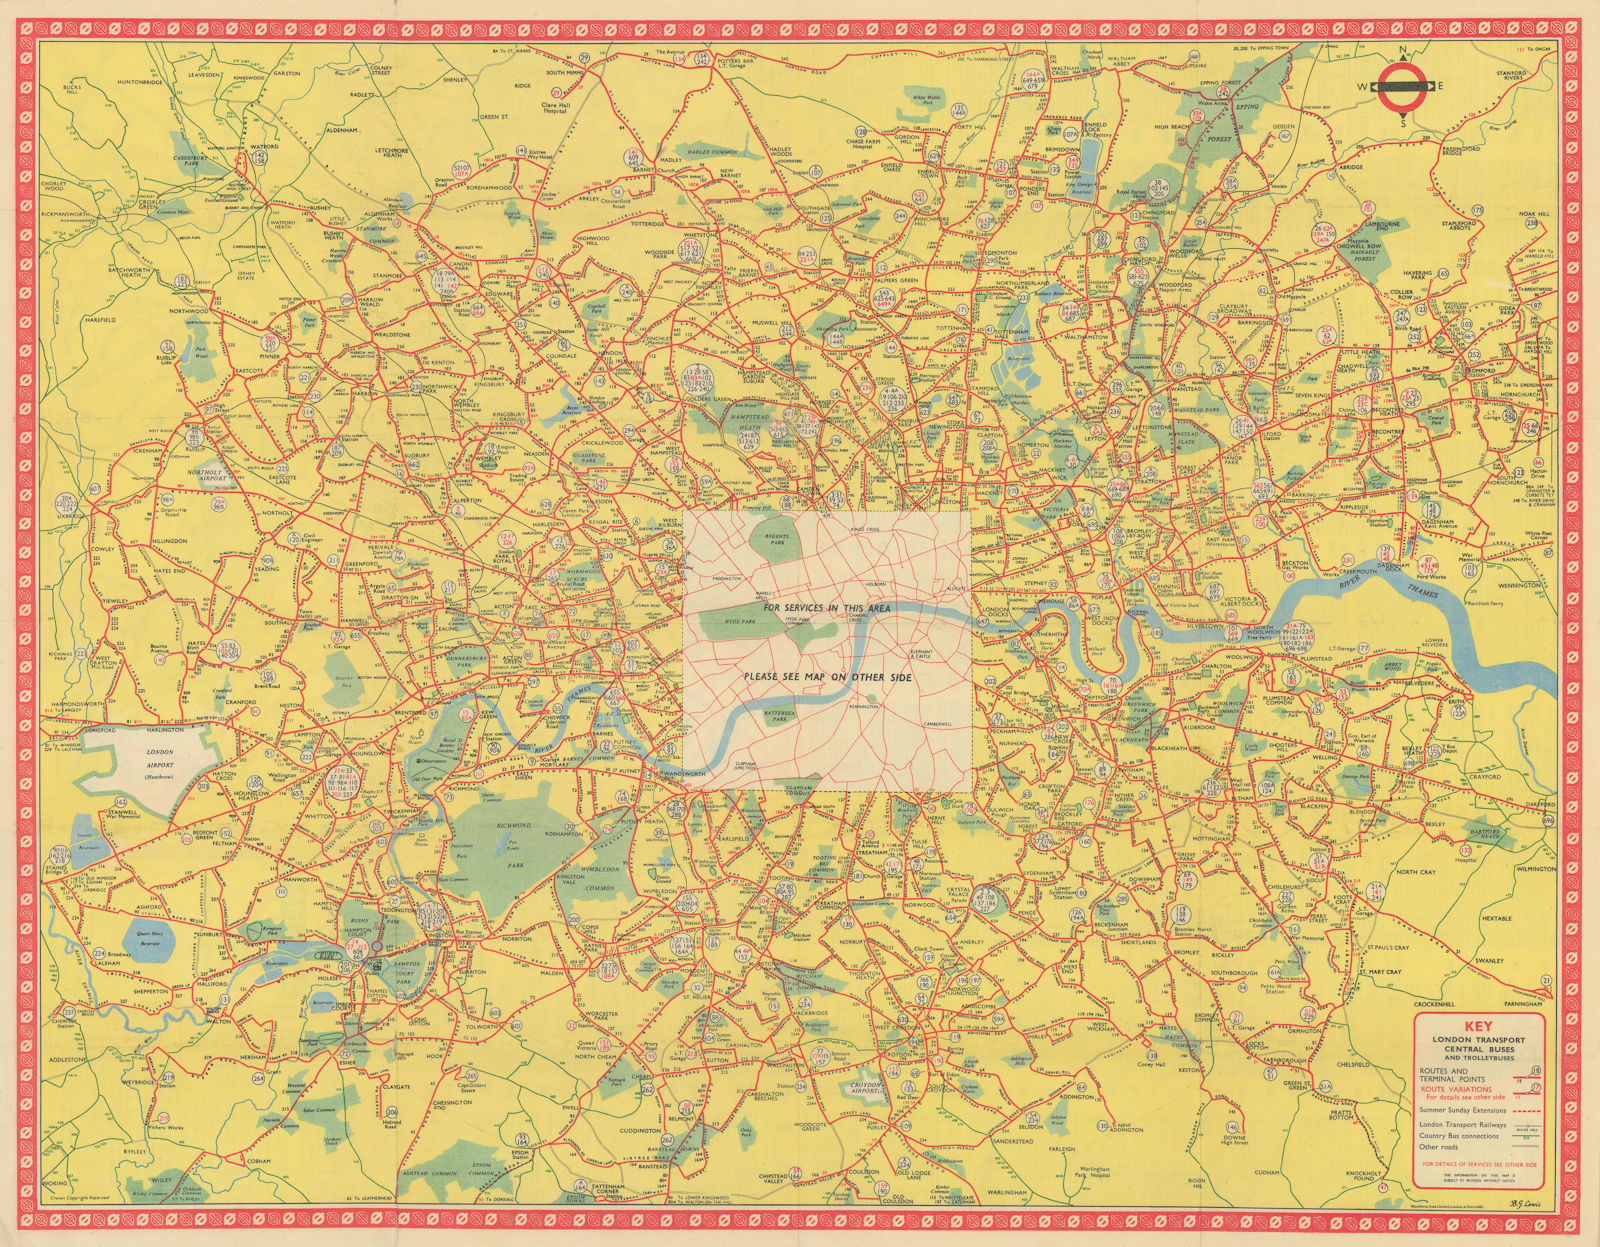 London Transport Bus map Central Area inc. Trolleybuses 754. LEWIS 1954